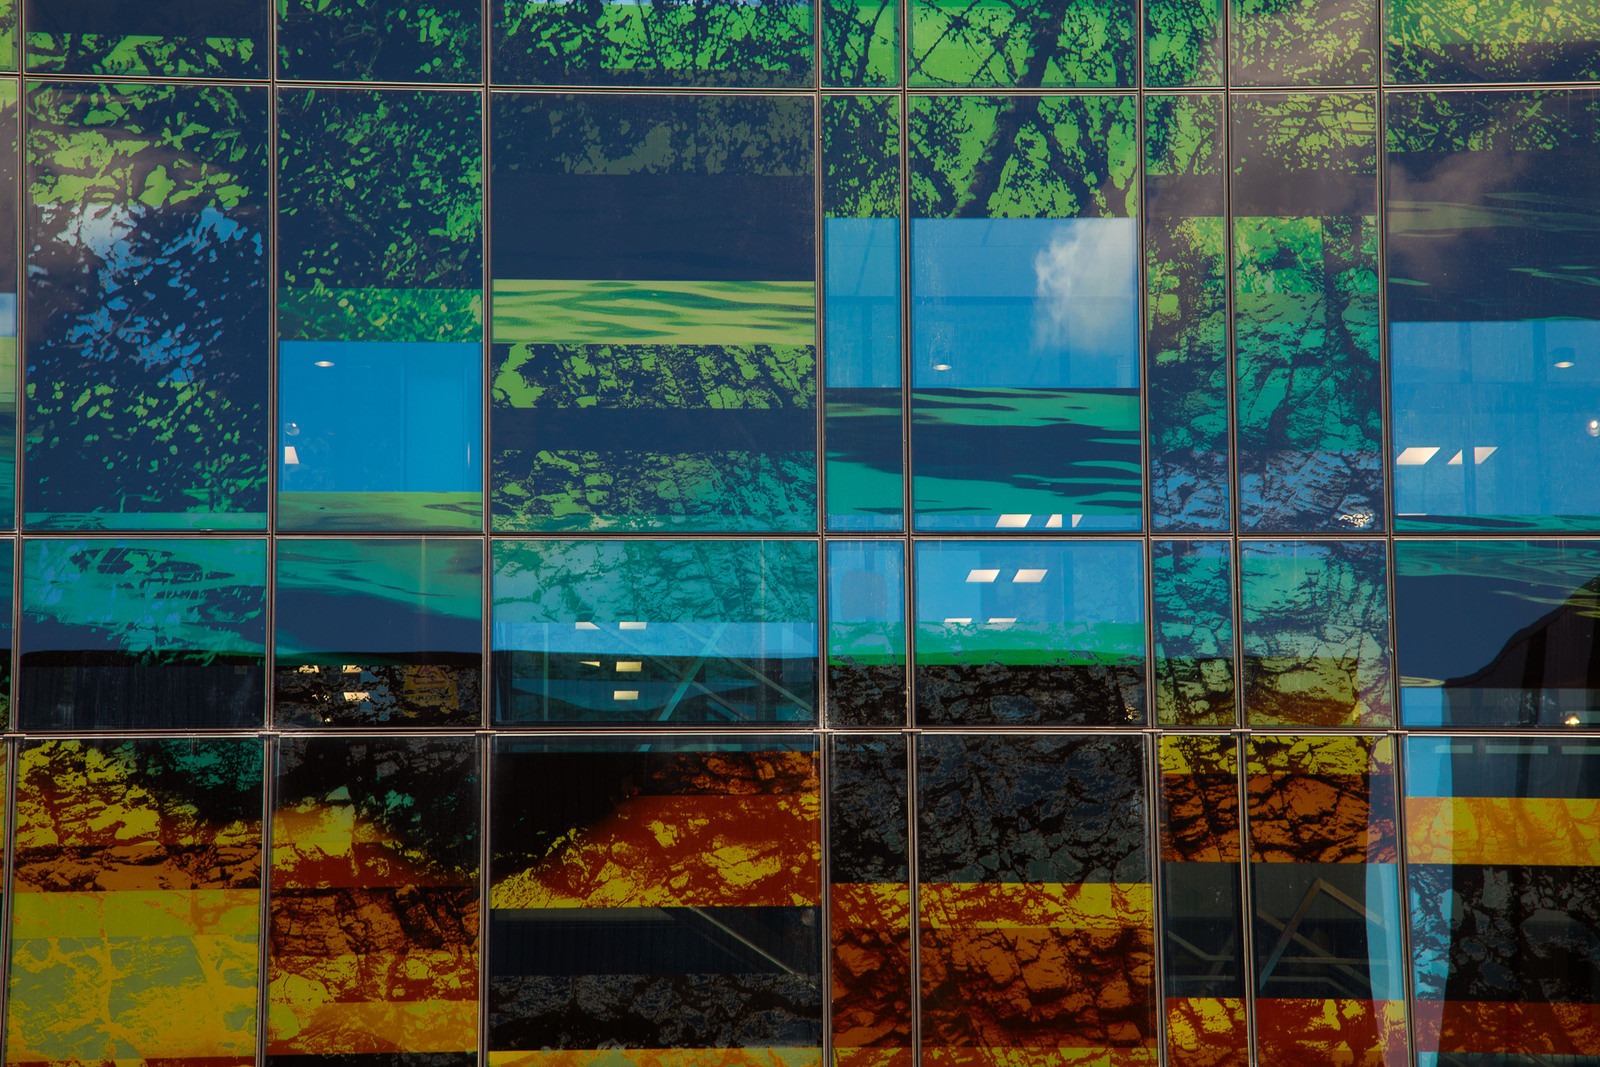 Patterned glass window panels with tree forest design, adding a decorative touch to the exterior